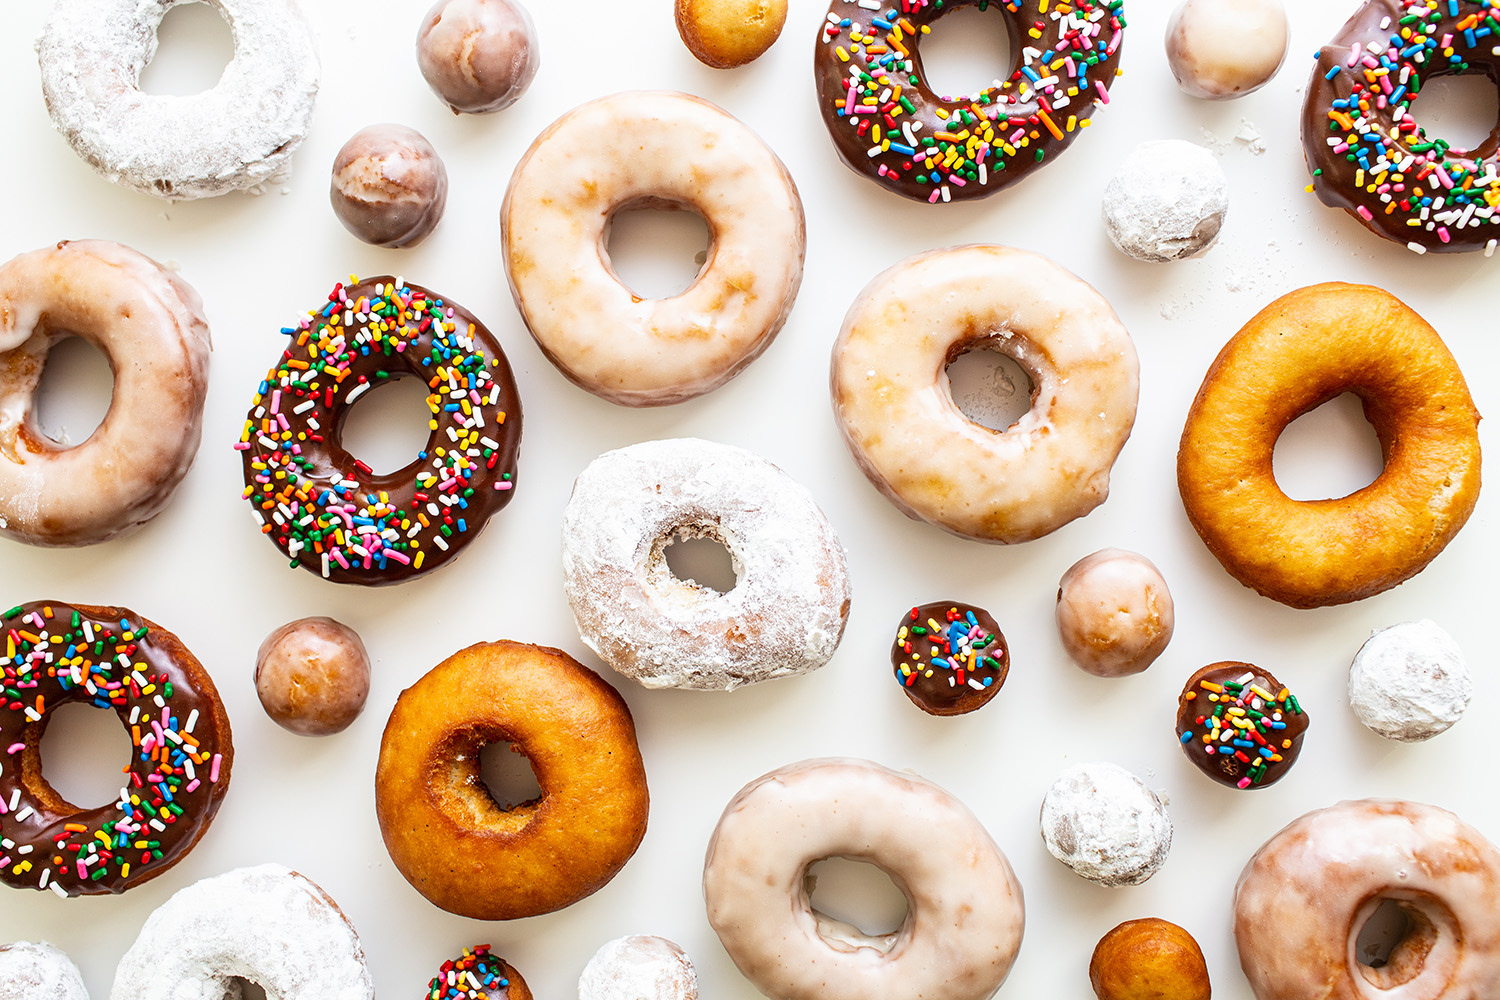 a dozen doughnuts on a white background, with some doughnut holes scattered between.